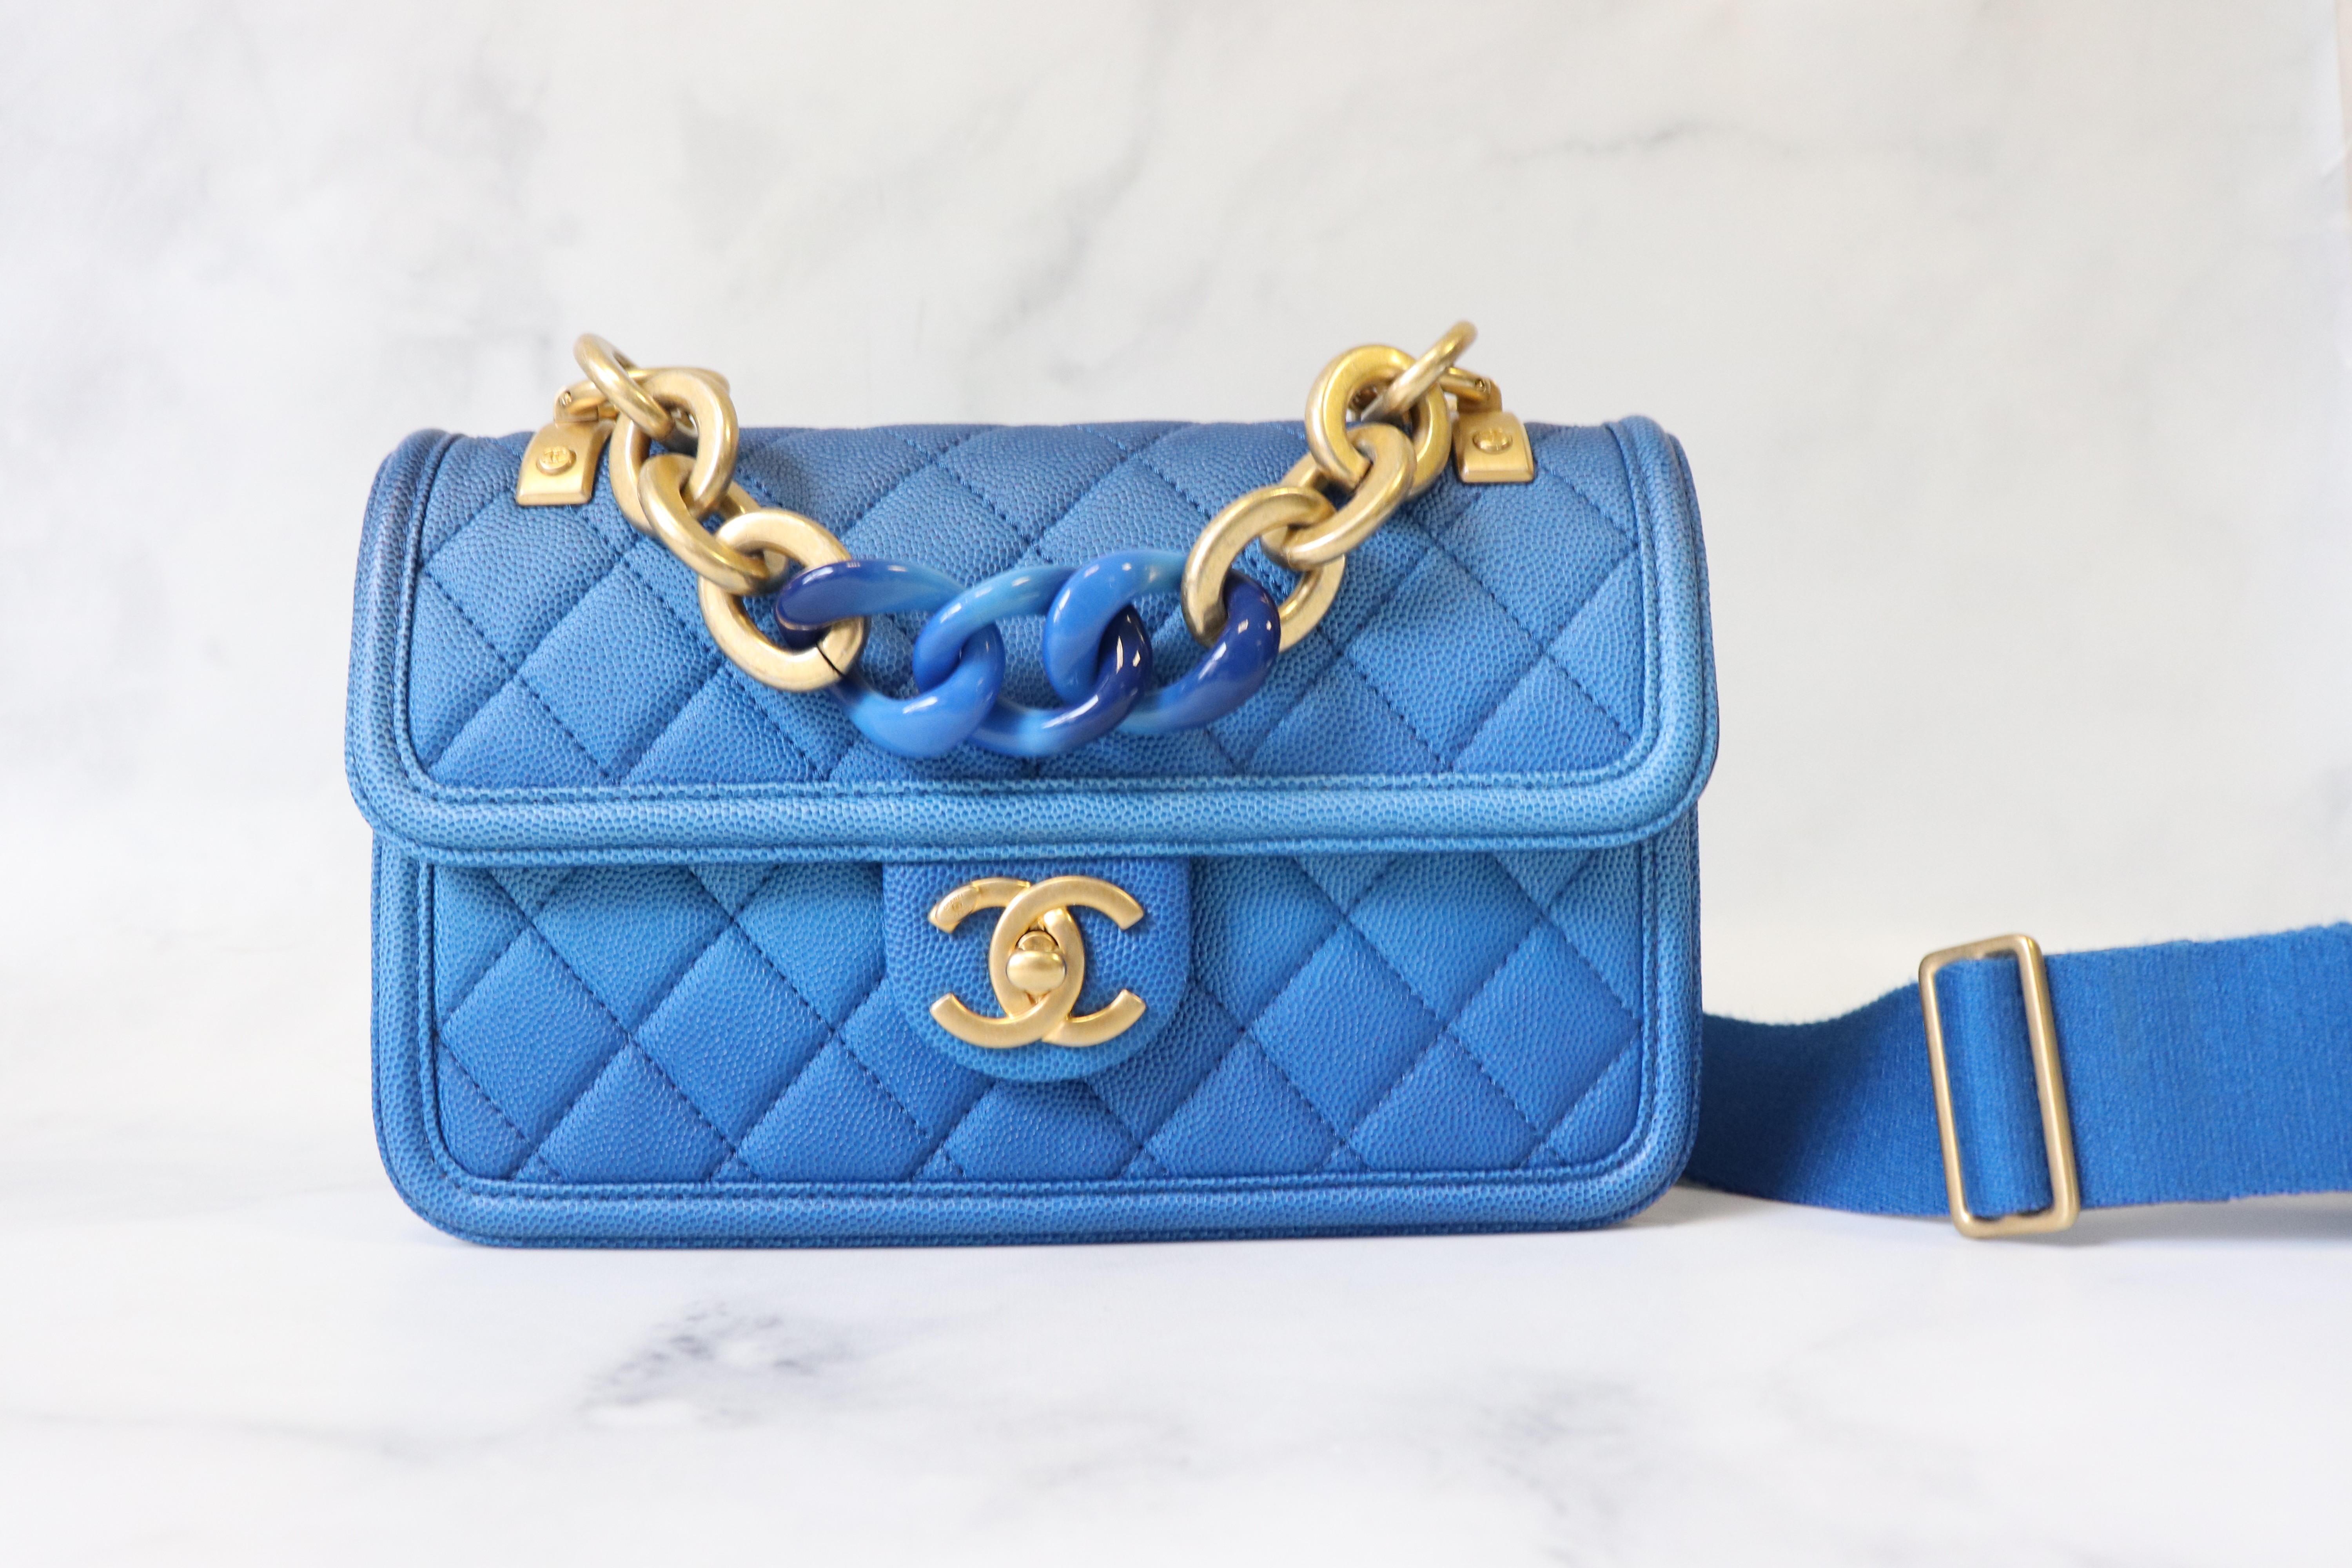 Chanel Sunset By The Sea Bag Small, Blue Caviar Leather Ombre